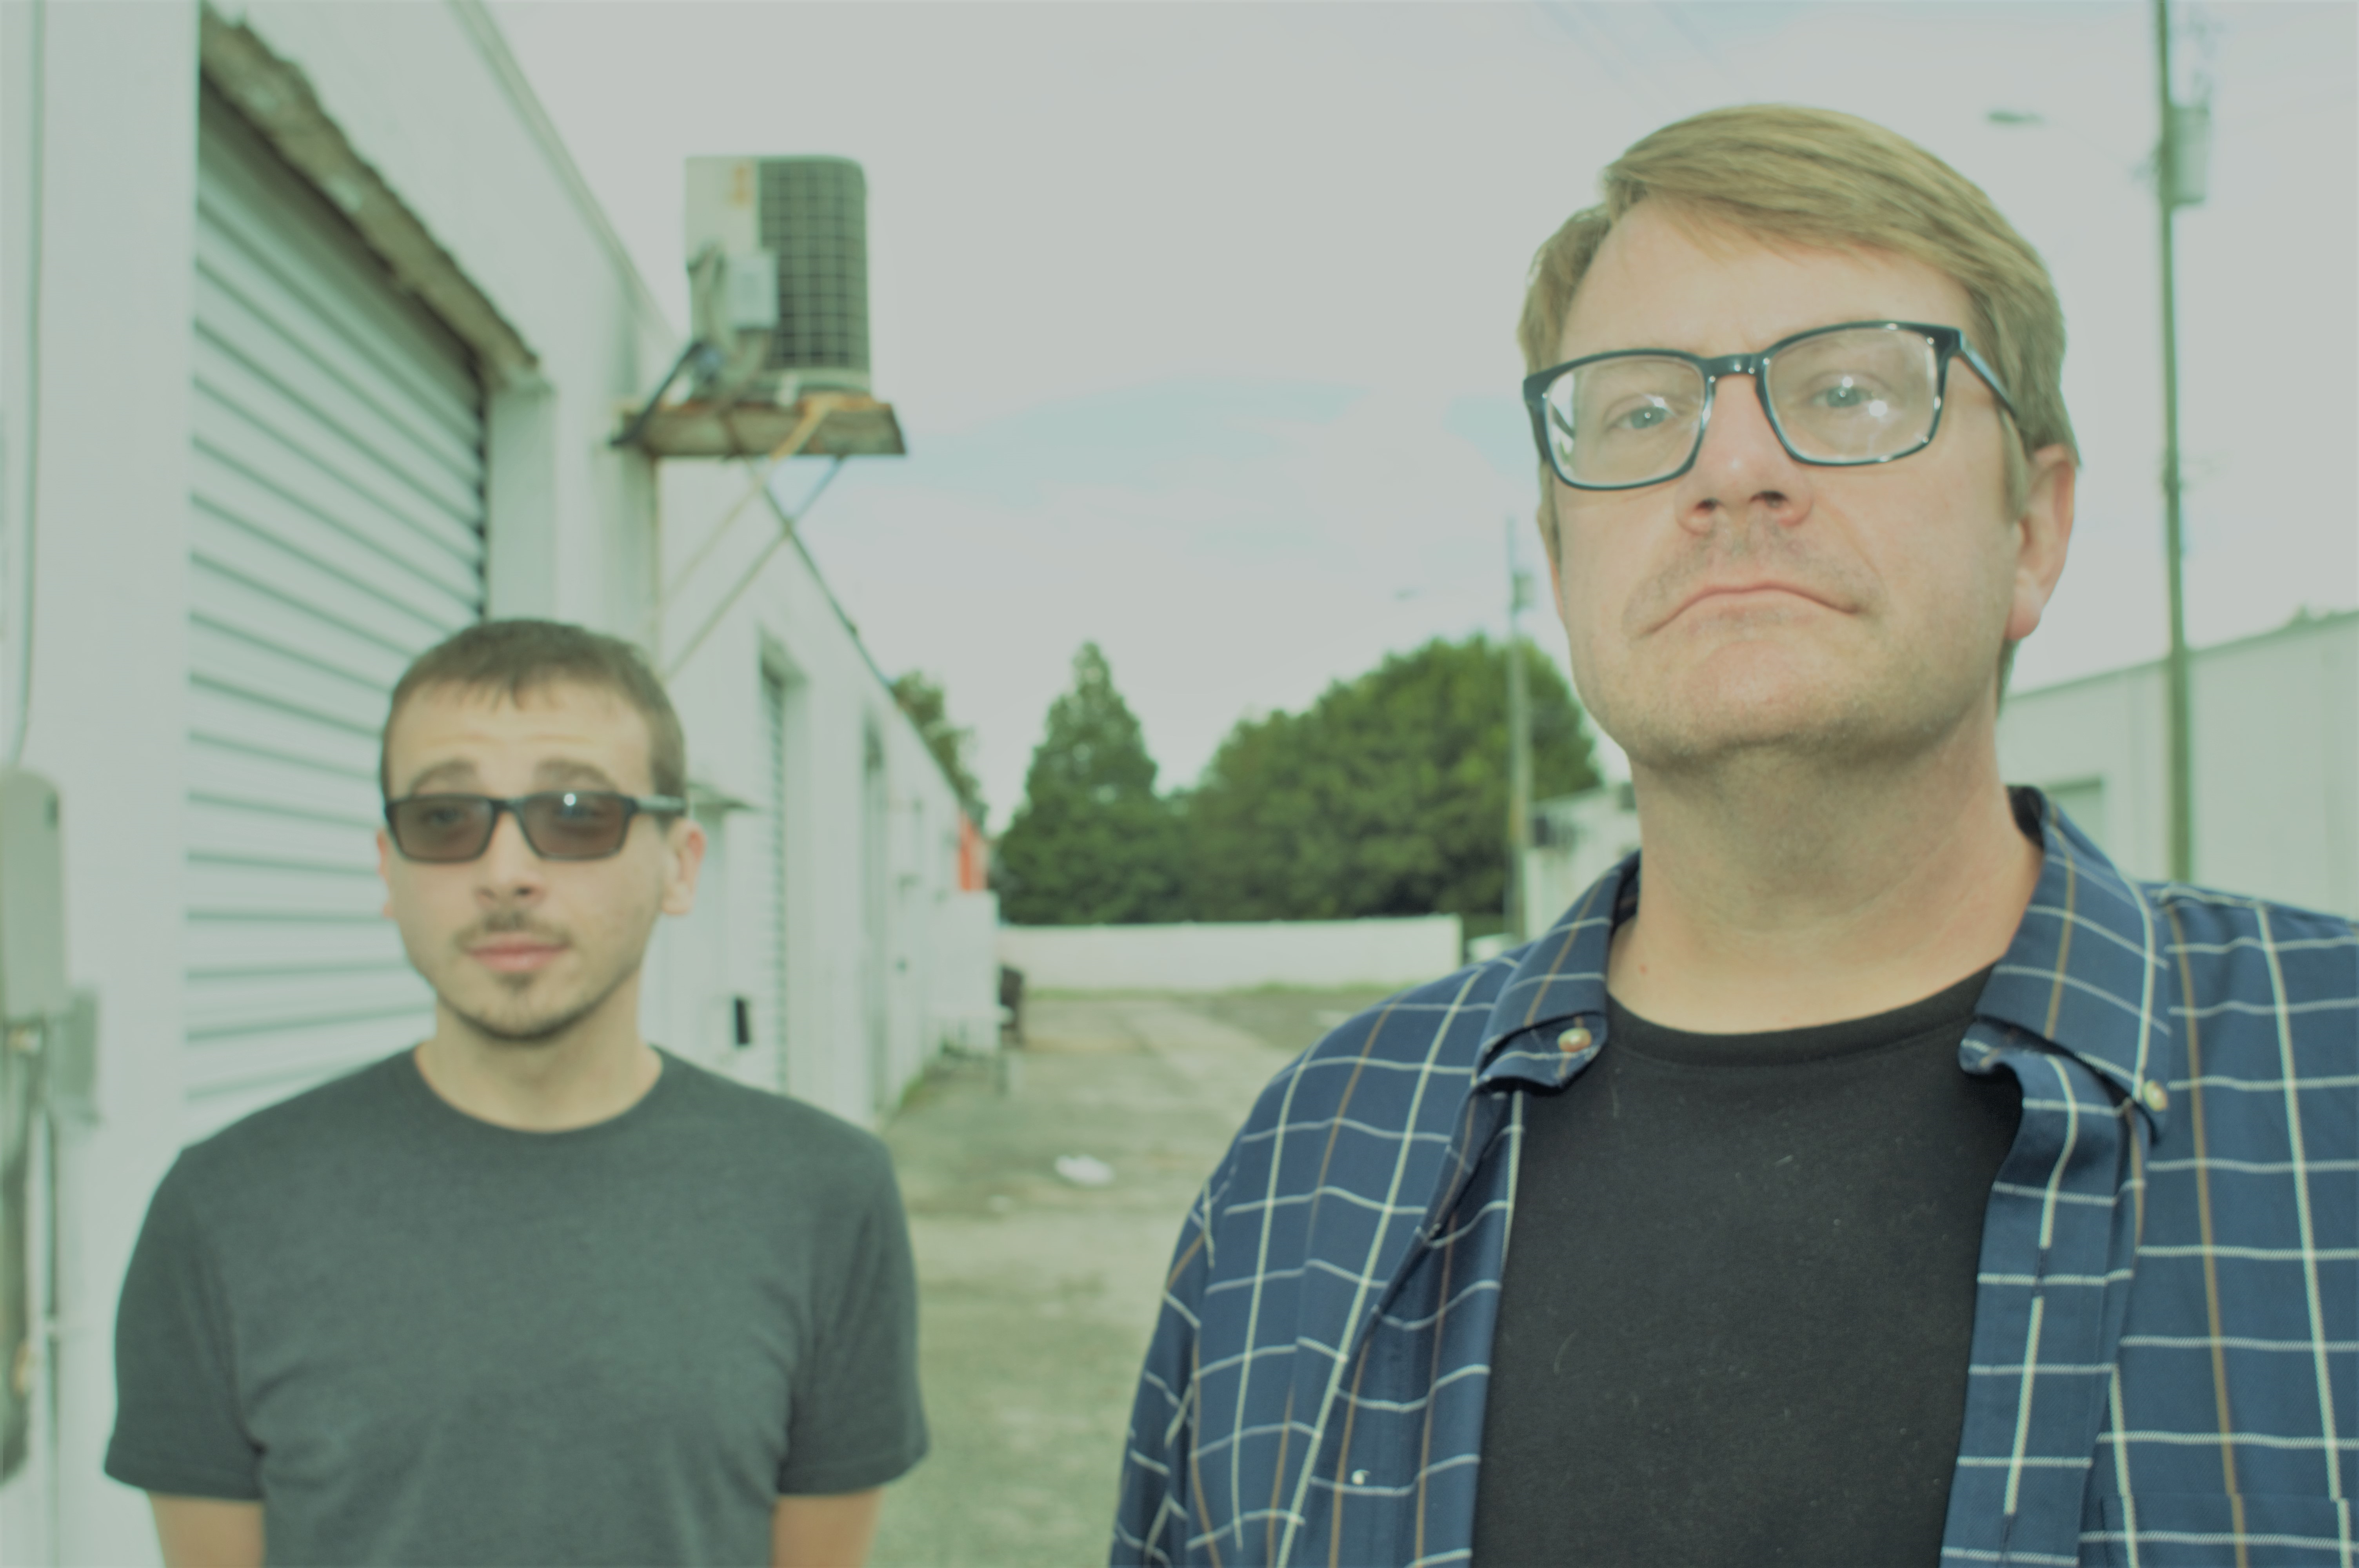 Math Rock Dignitary Chris Trull Talks About His New Band Terms, Their Upcoming Album “All Becomes Indistinct,” His First Duo, How Working Remotely Has Affected Their Sound, and Working with SKiN GRAFT